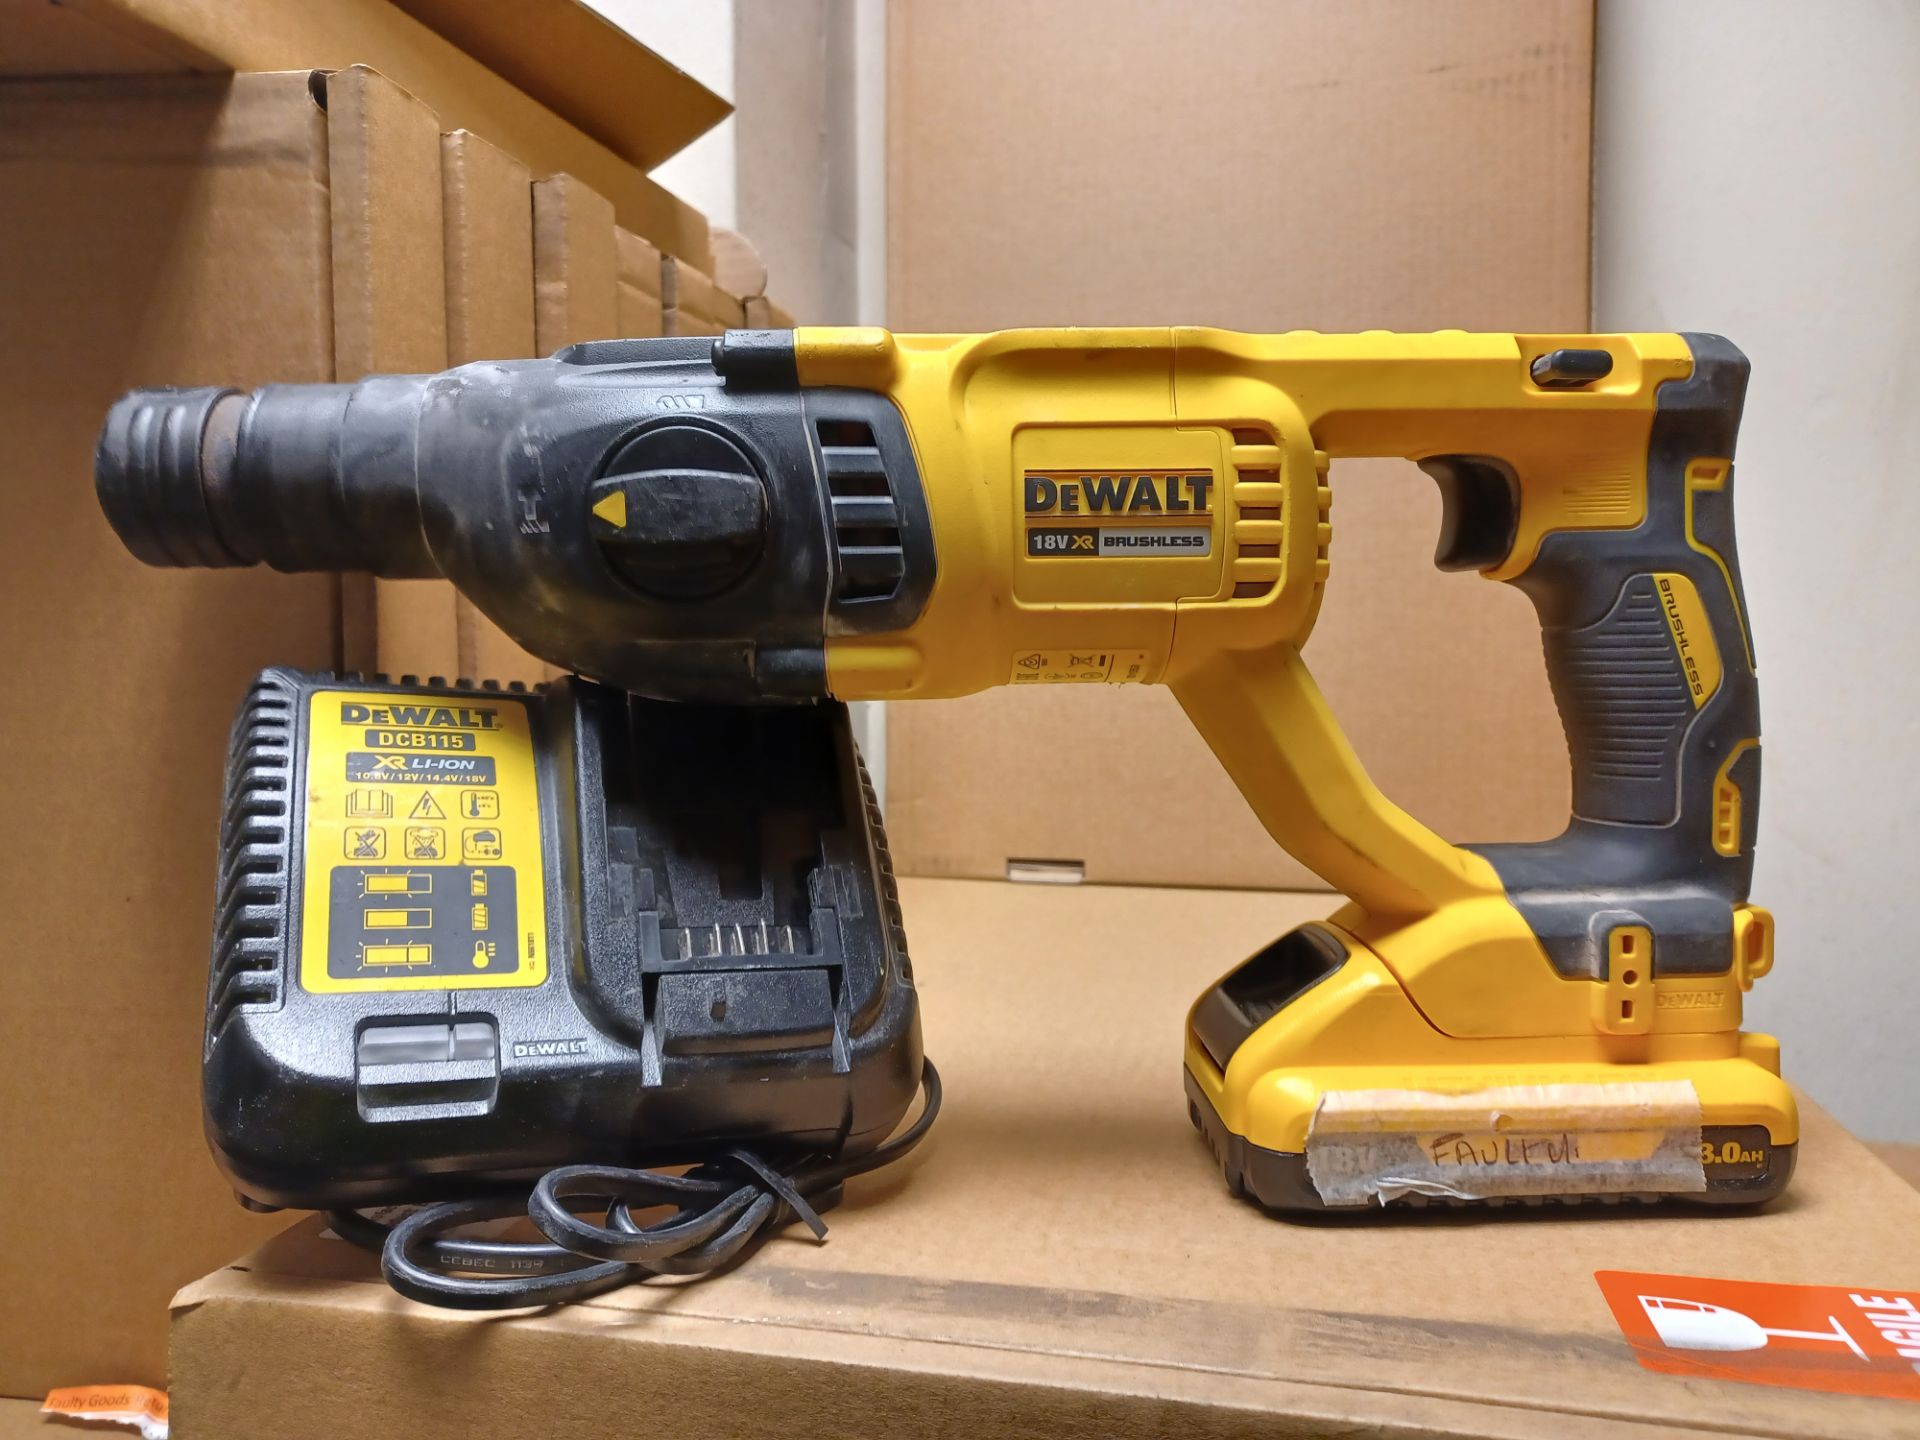 DEWALT DCH033 3KG 18V 4.0AH LI-ION XR BRUSHLESS CORDLESS SDS PLUS DRILL WITH BATTERY AND CHARGER